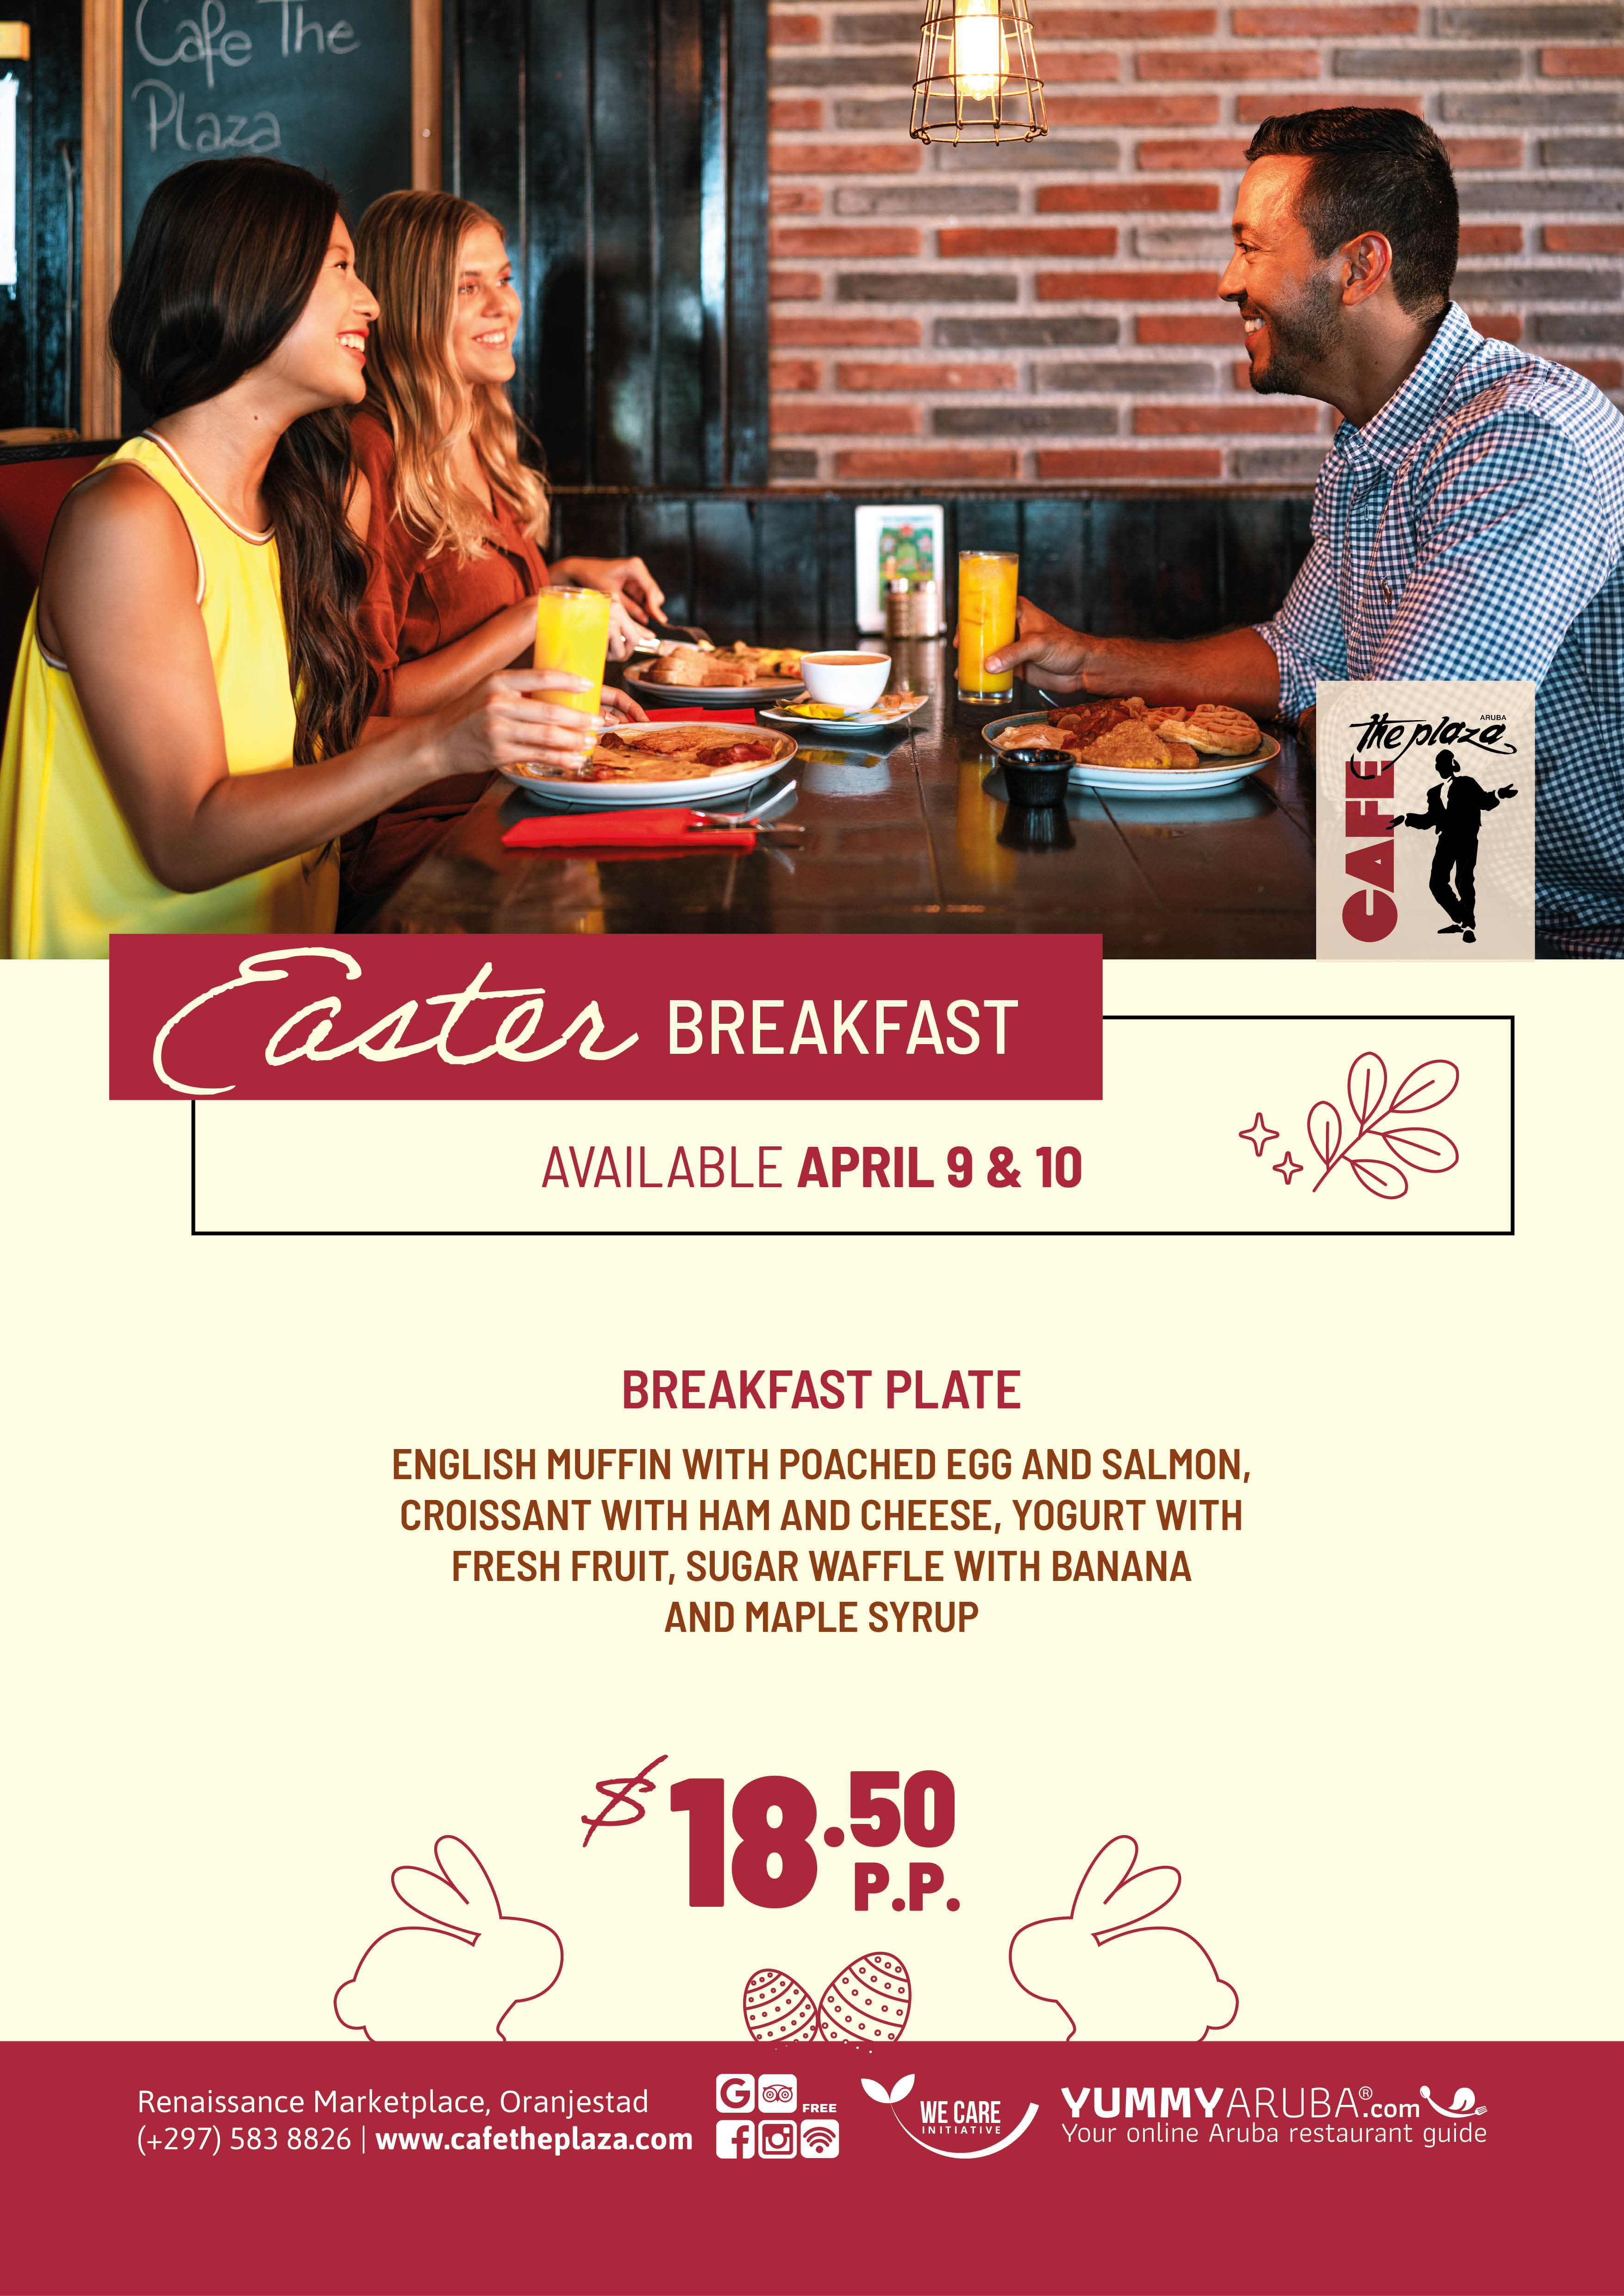 Join us for an amazing experience this Easter weekend at Café the Plaza, located in the heart of the renaissance marketplace. Our must-stop restaurant offers a fun atmosphere, where you can unwind while enjoying a delicious breakfast plate for only $18.50 per person.